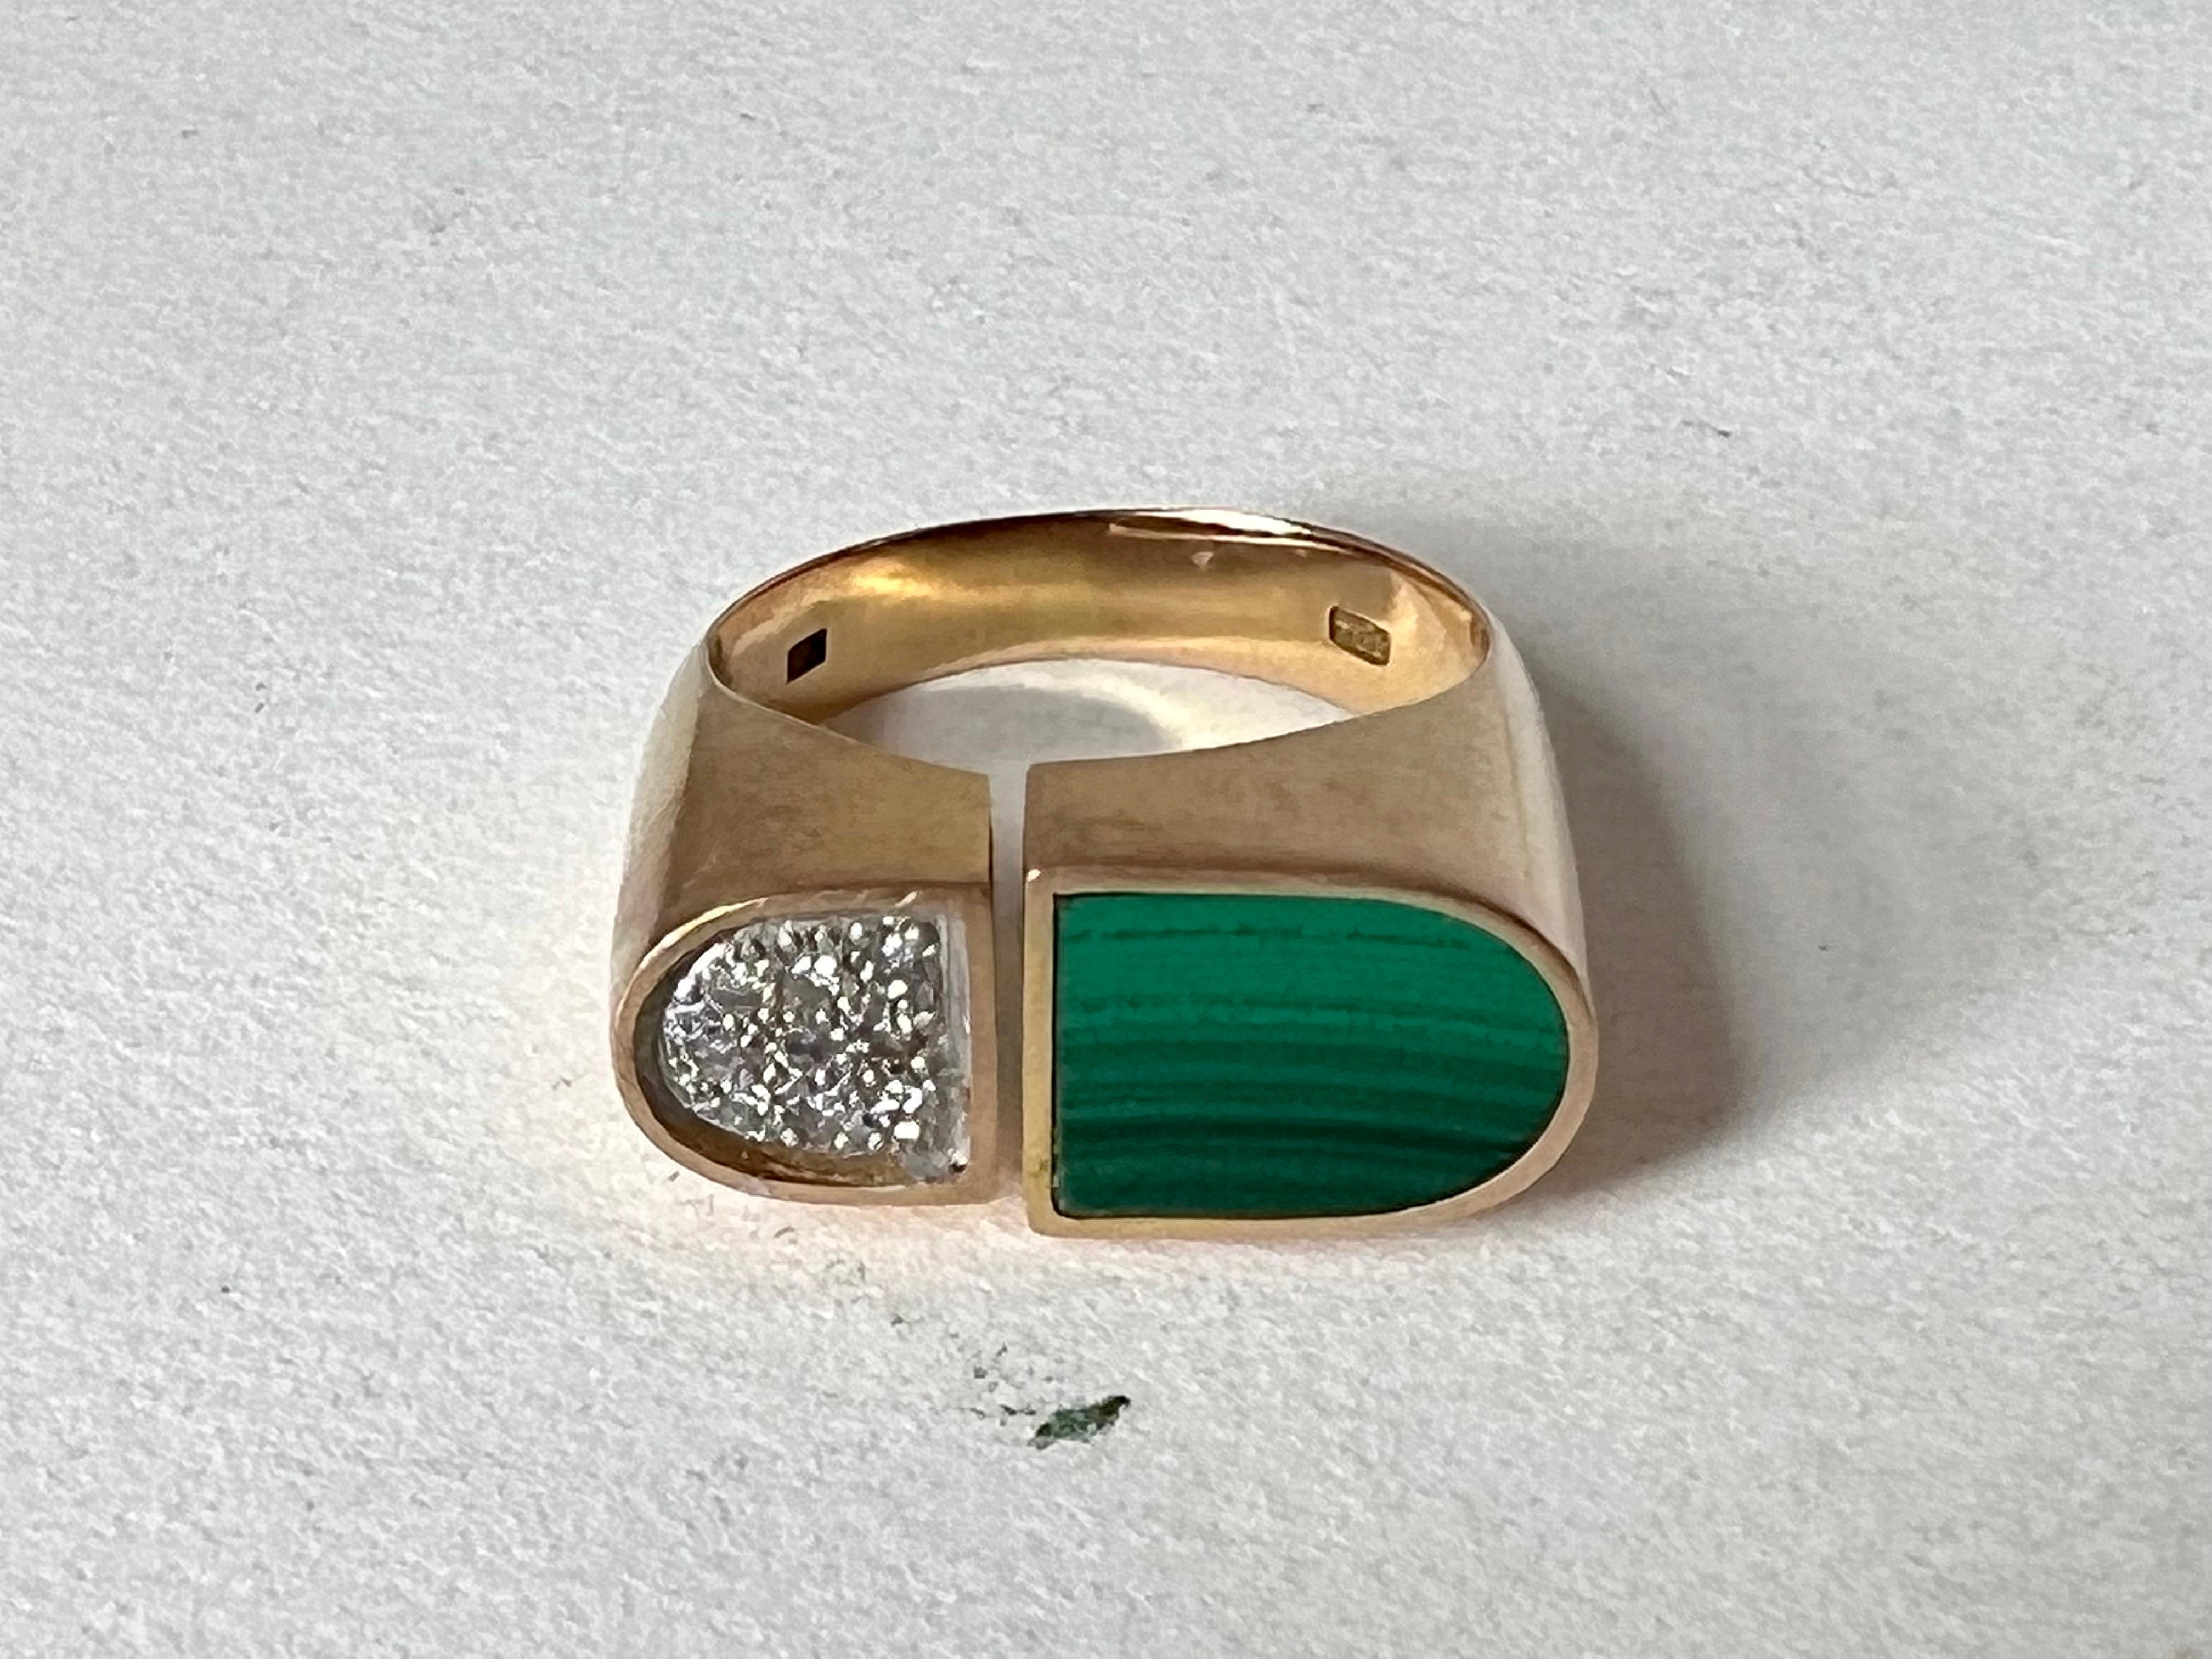 1970's Italian Malachite and diamonds gold ring. 14K gold,.
Has wear by age and use. 